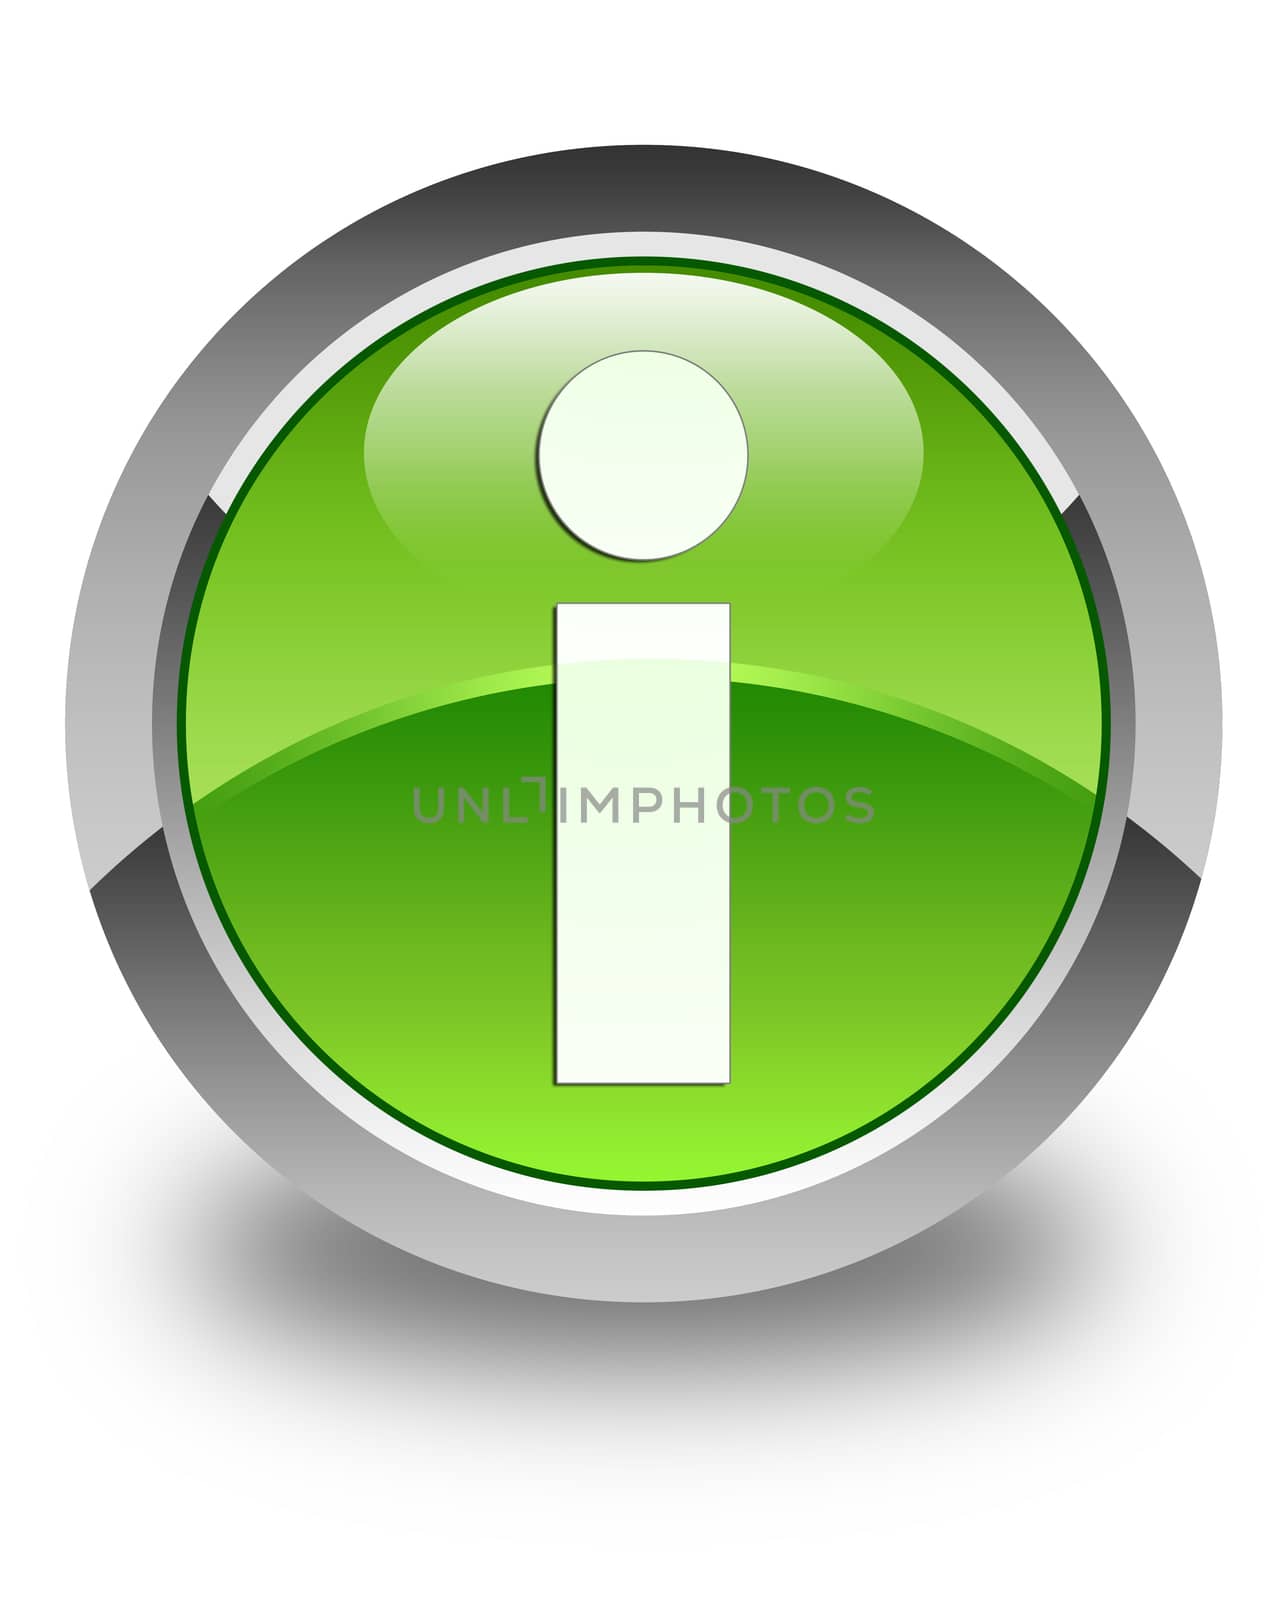 Info icon on glossy green round button